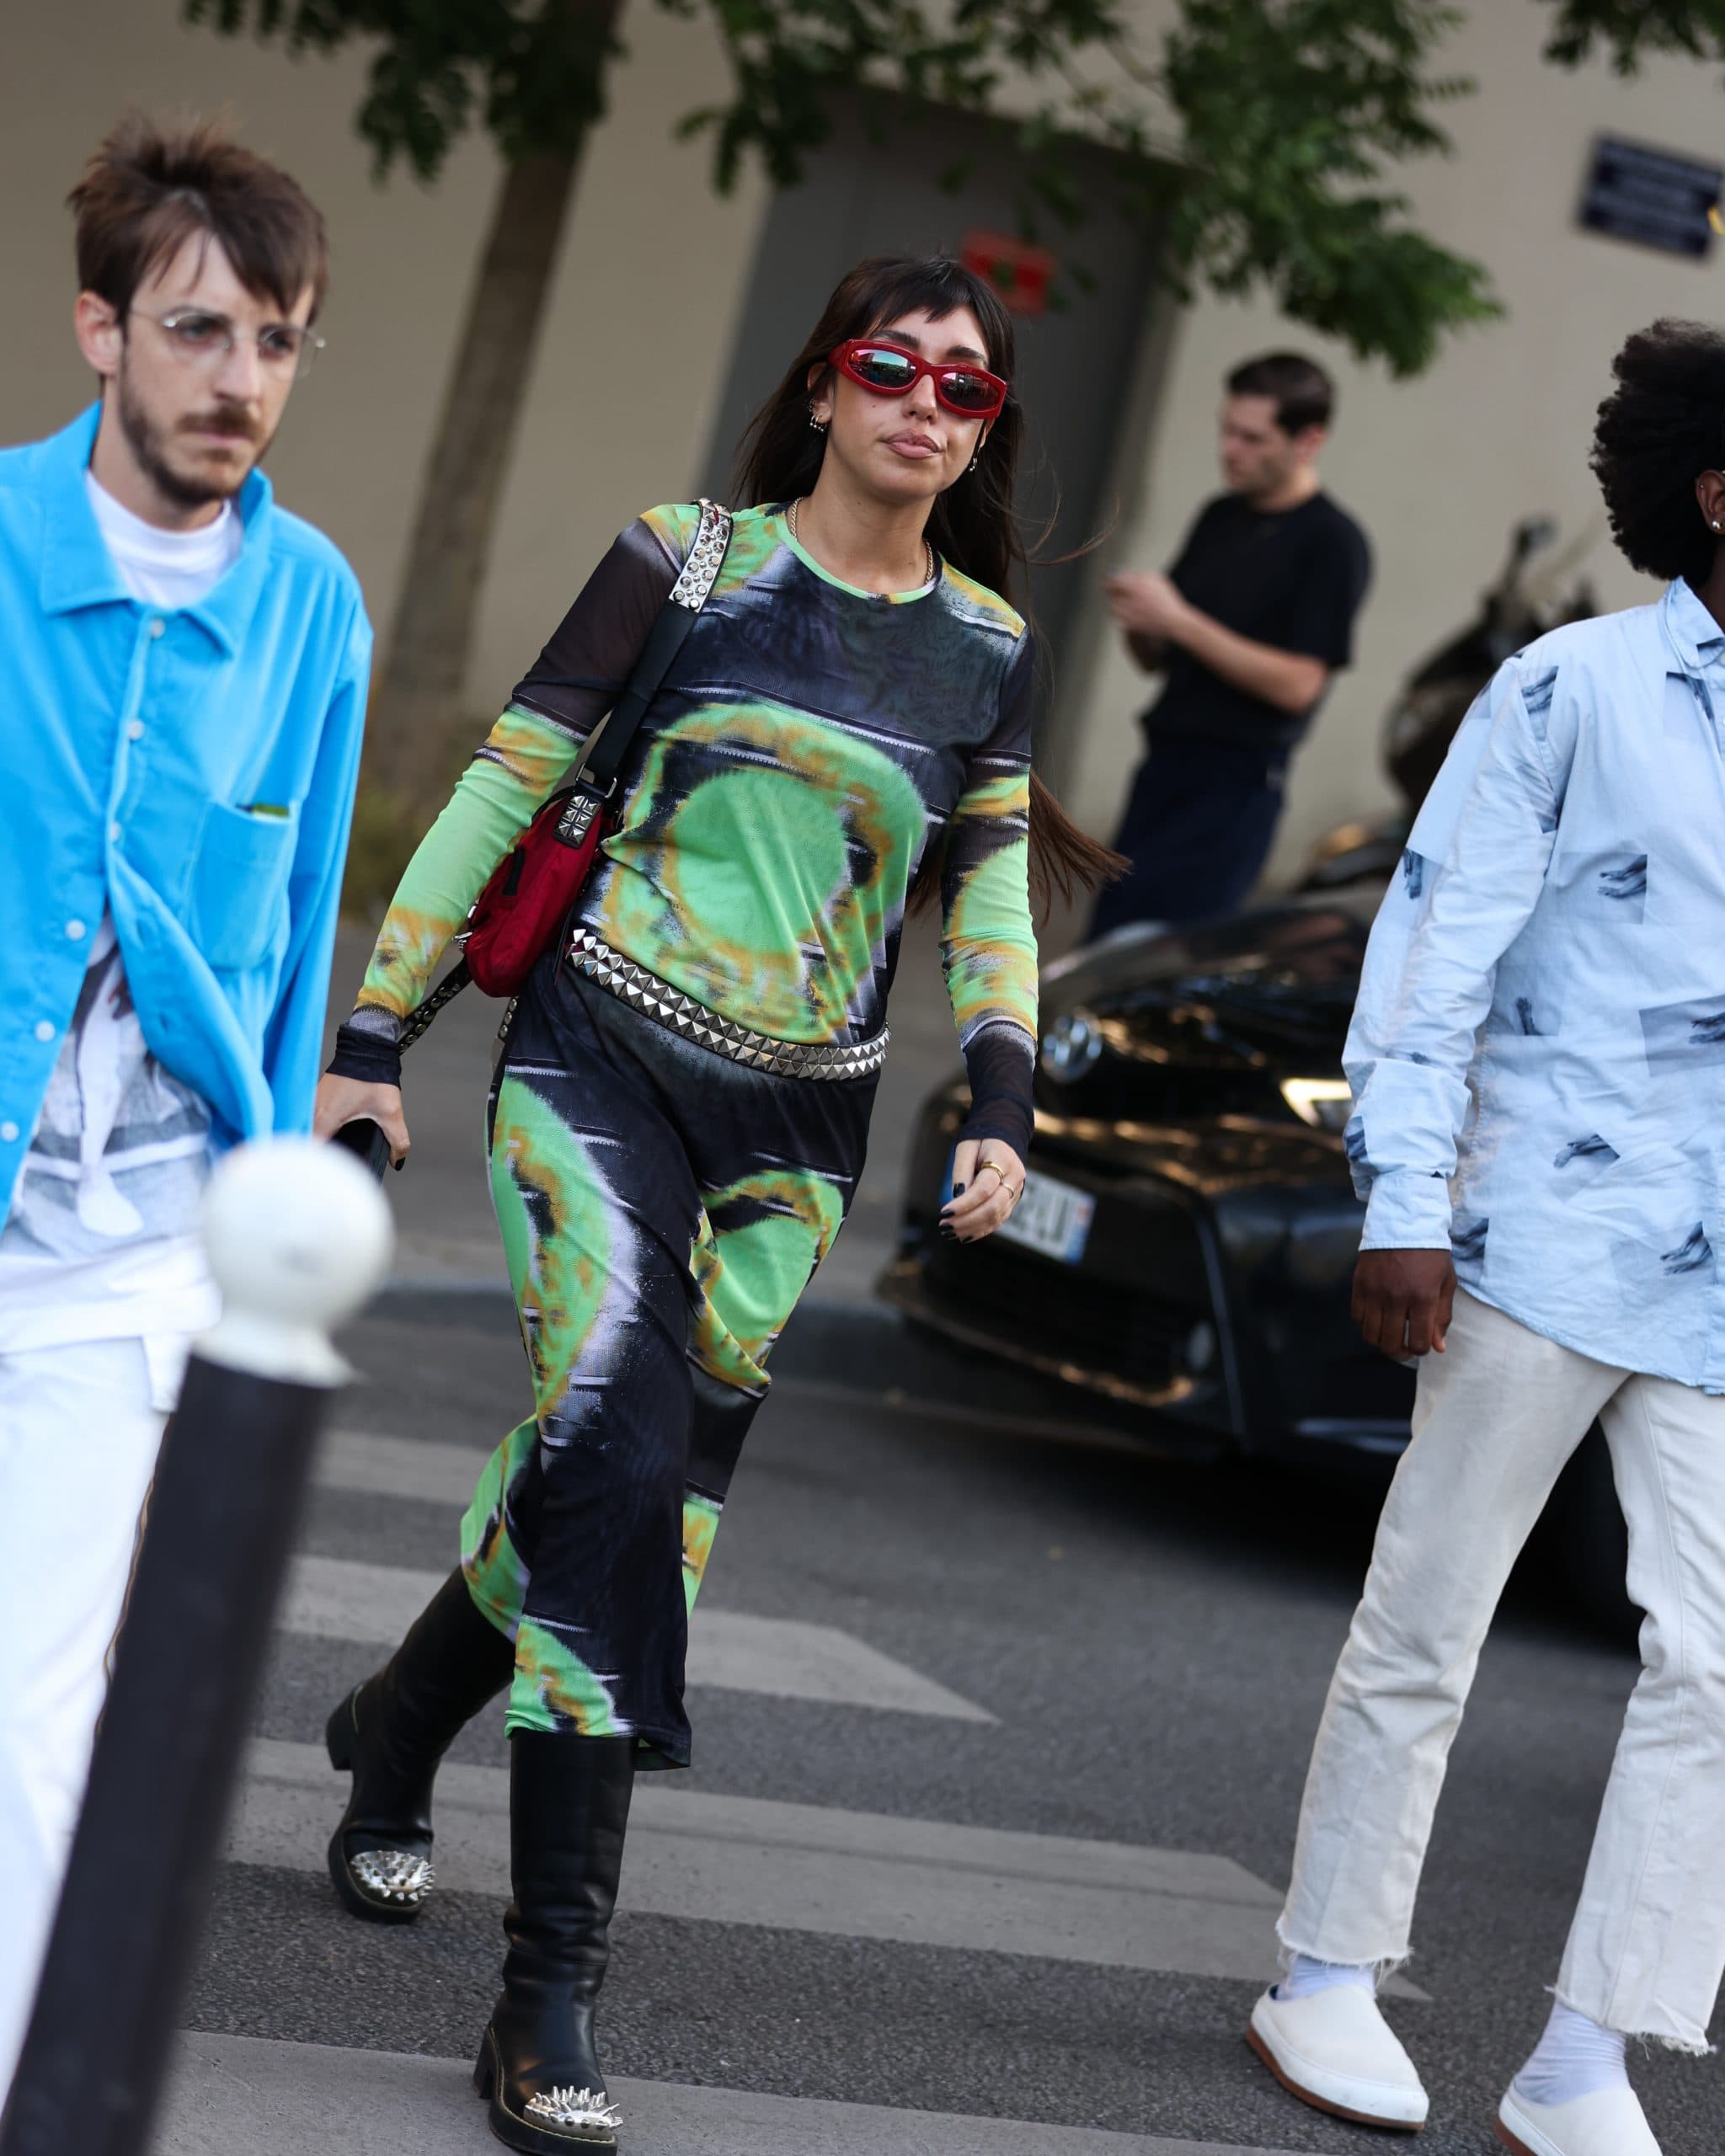 Colorful Spring 2023 Street Style Fashion Trend | The Impression